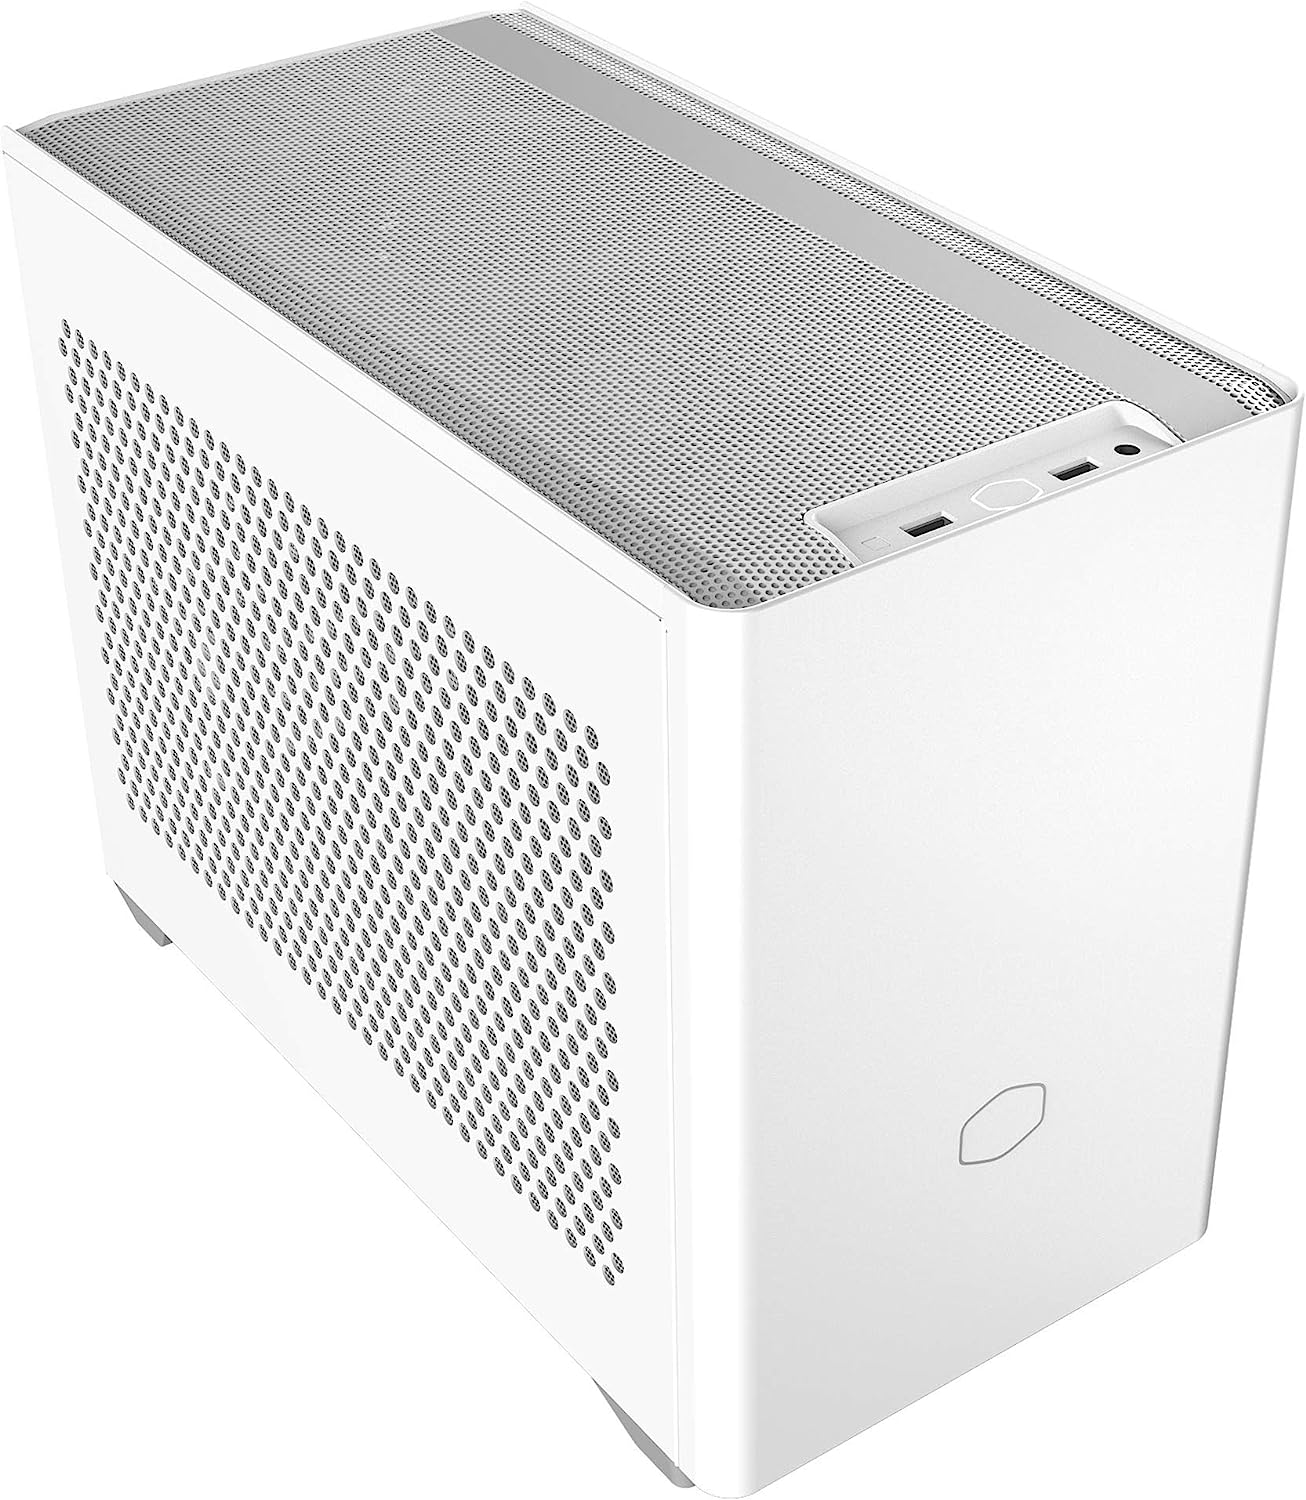 Cooler Master NR200 White SFF Small Form Factor Mini-ITX Computer Case (Black or White) $40 After Rebate + Free Shipping